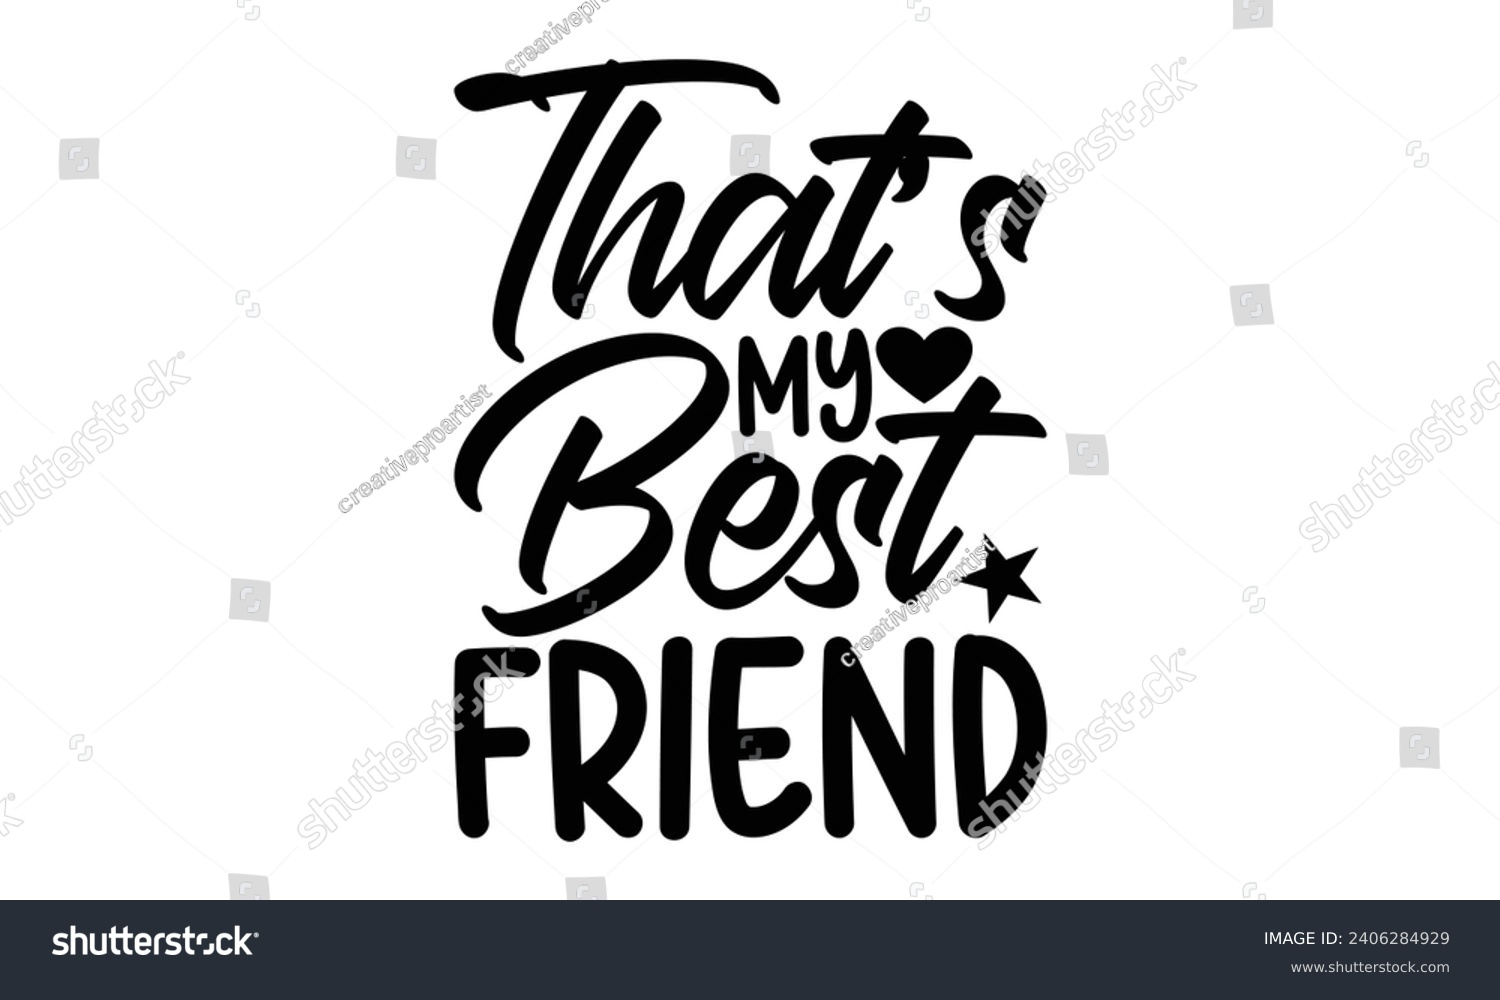 SVG of That’s My Best Friend- Best friends t- shirt design, Hand drawn lettering phrase, Illustration for prints on bags, posters, cards eps, Files for Cutting, Isolated on white background. svg